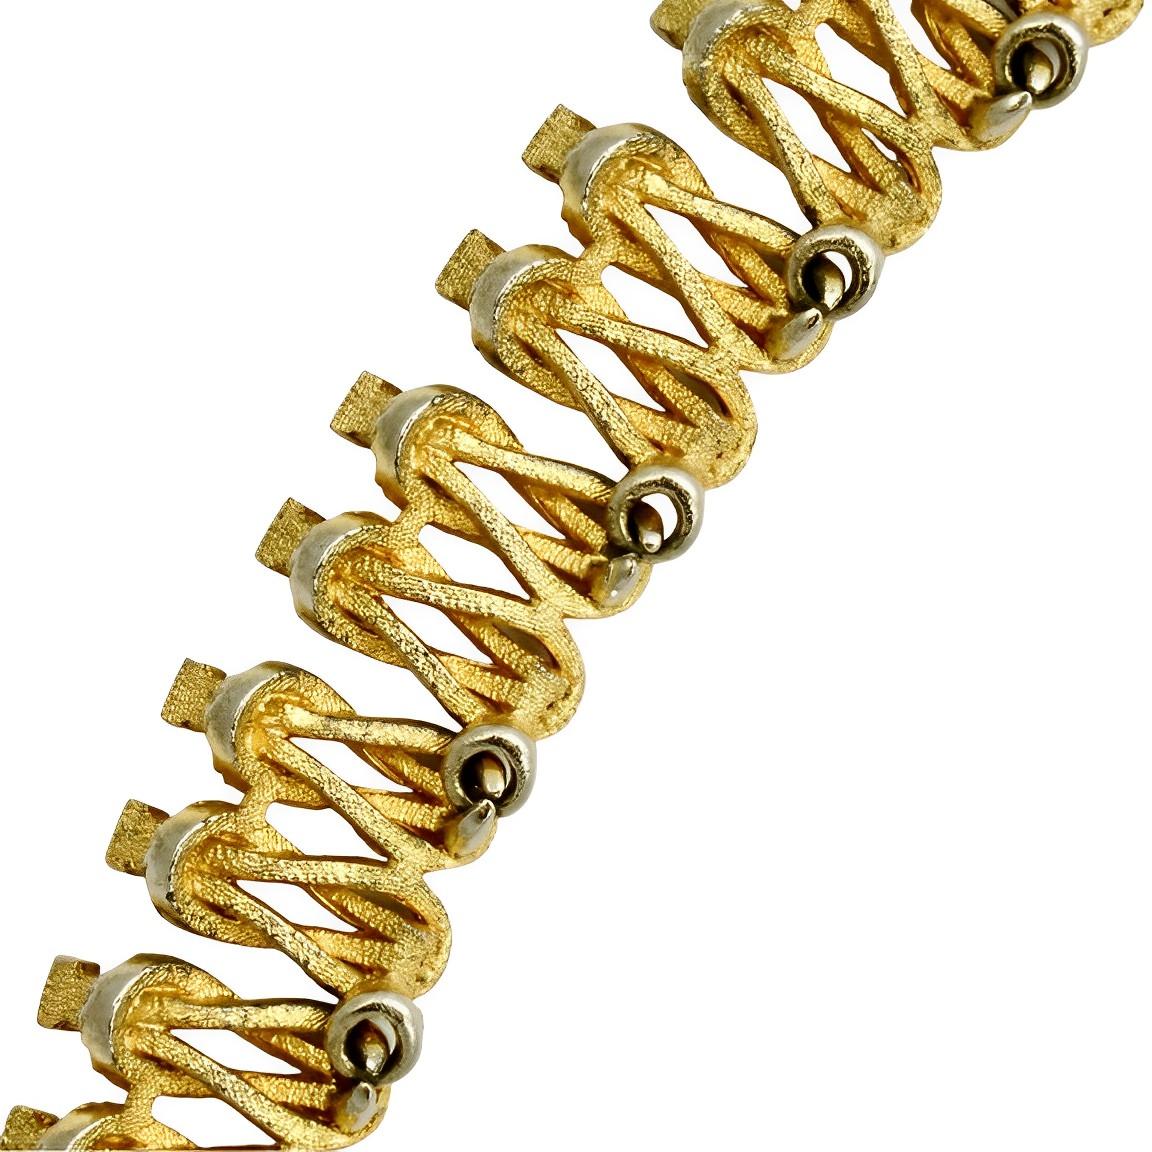 Gold Plated Textured Knot Design Link Necklace circa 1950s For Sale 2